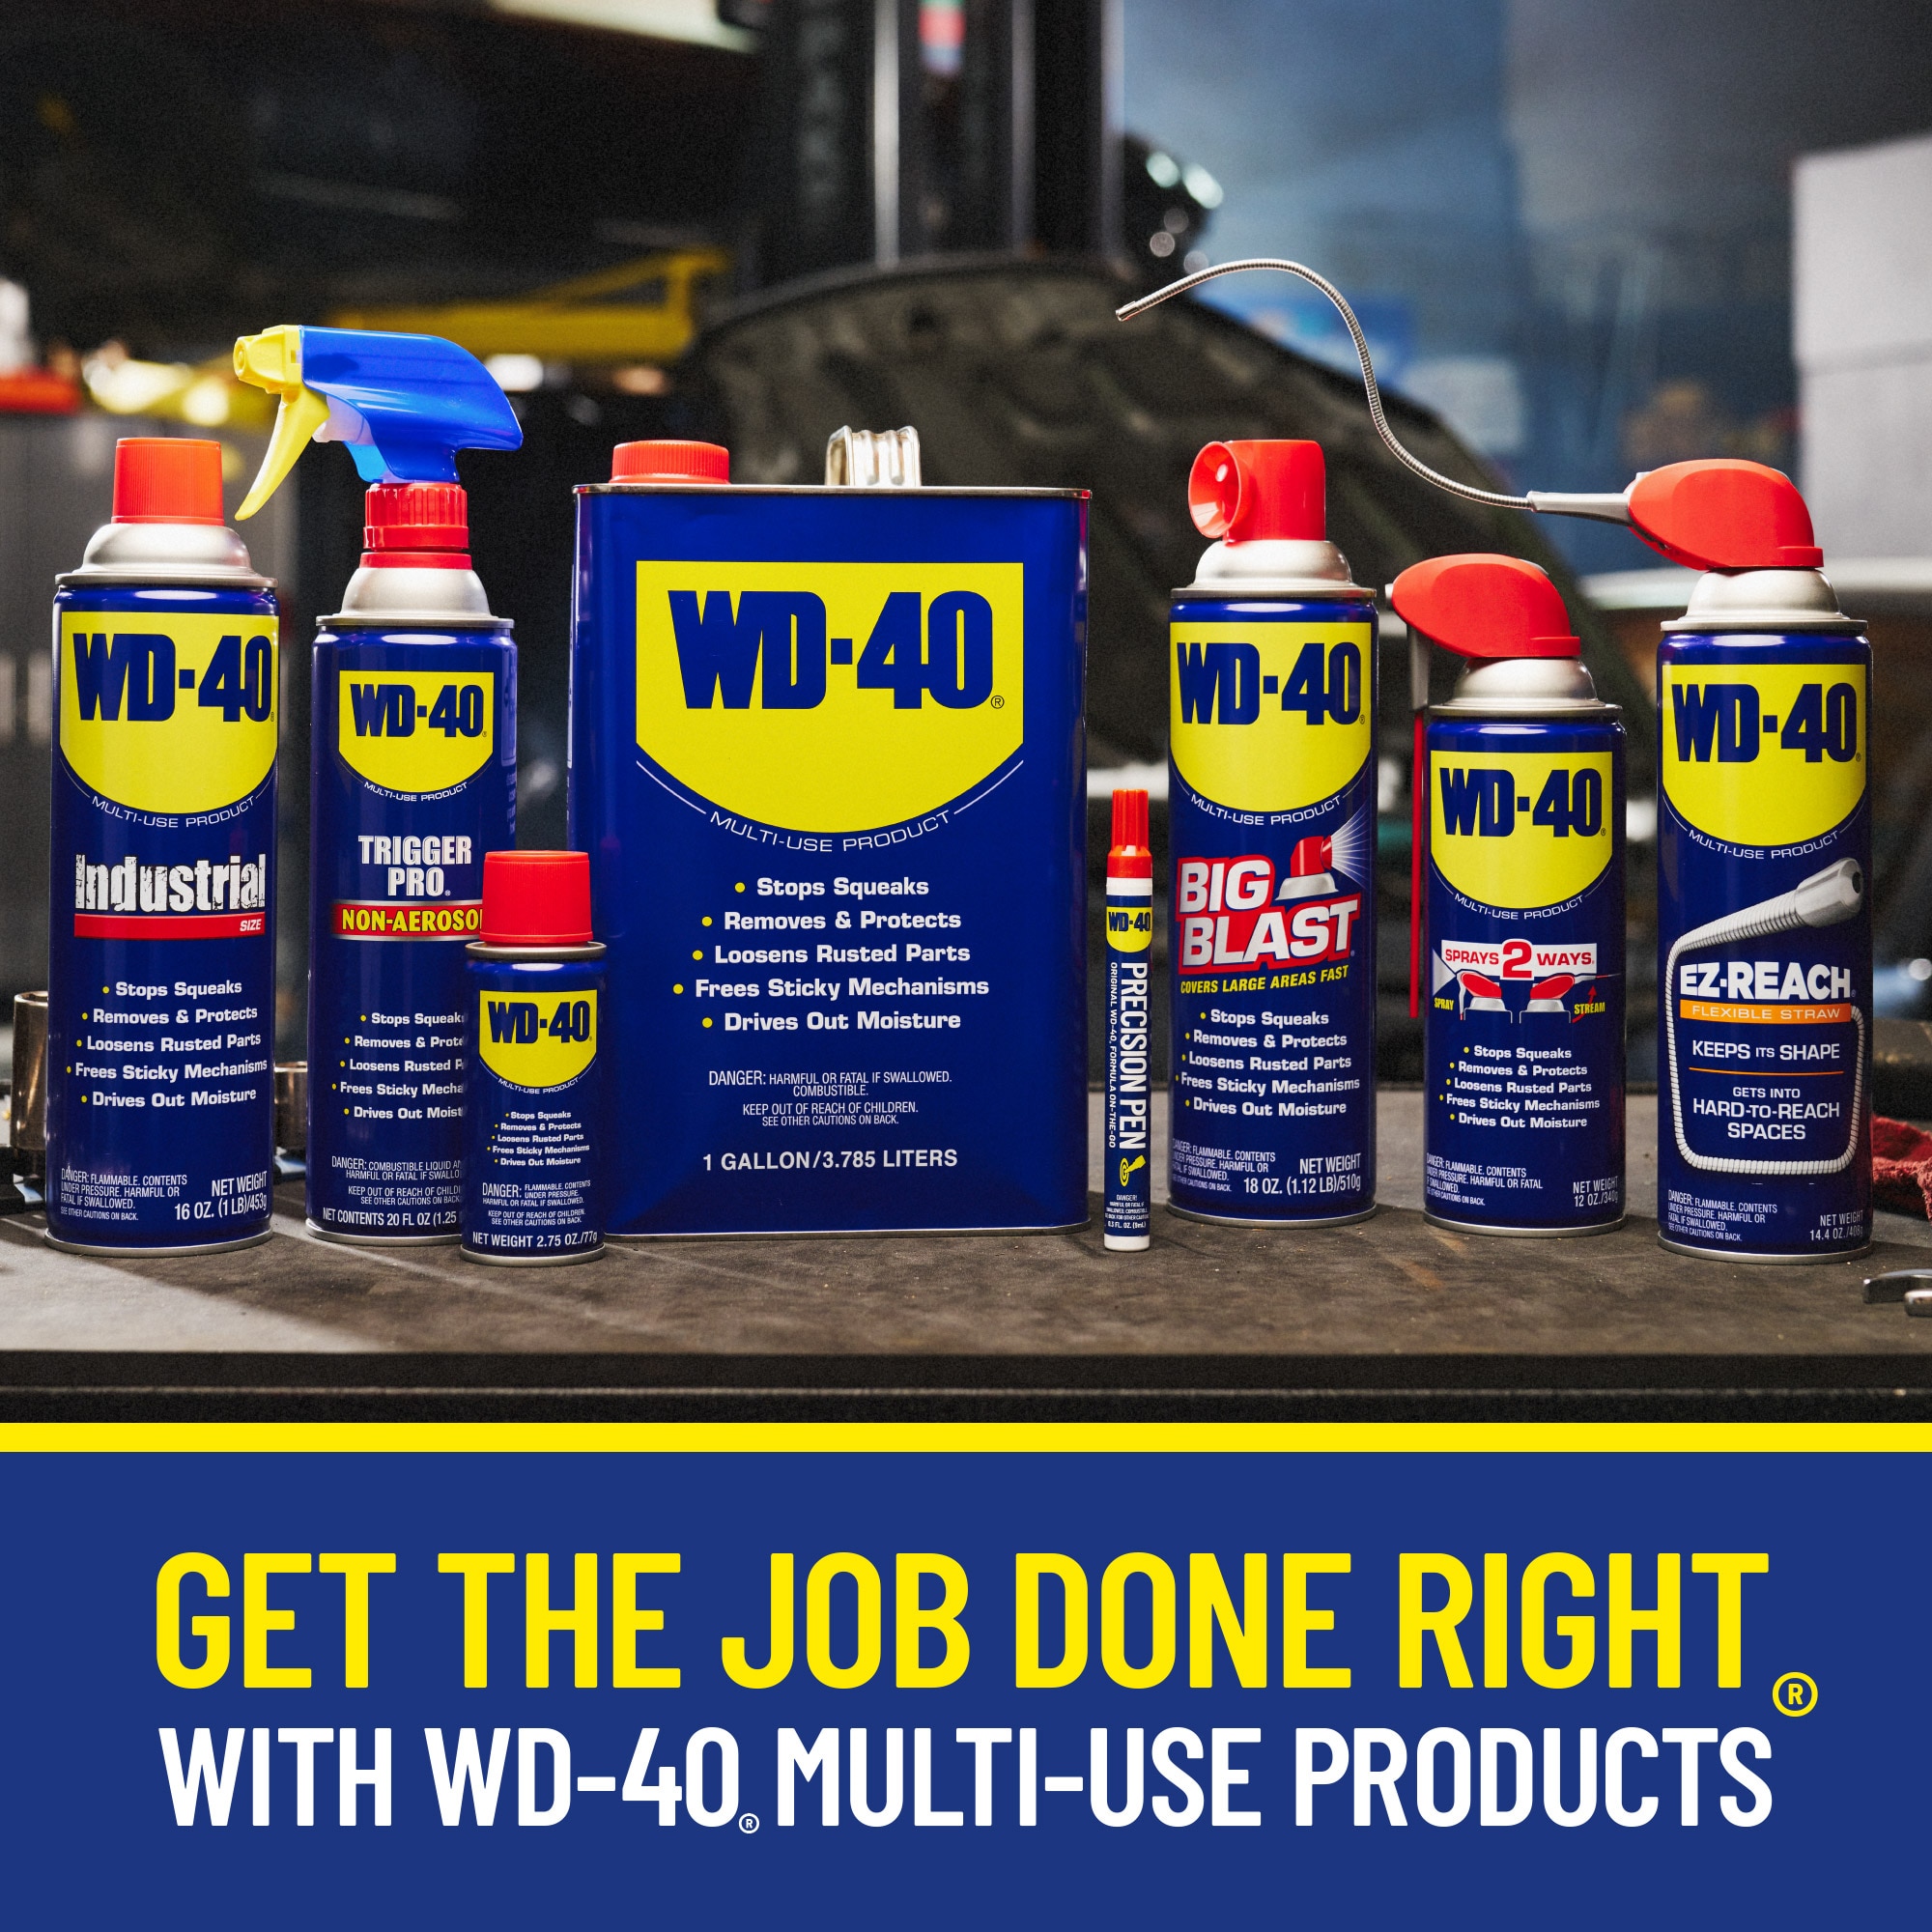 How to clean an oven inside out - WD40 India